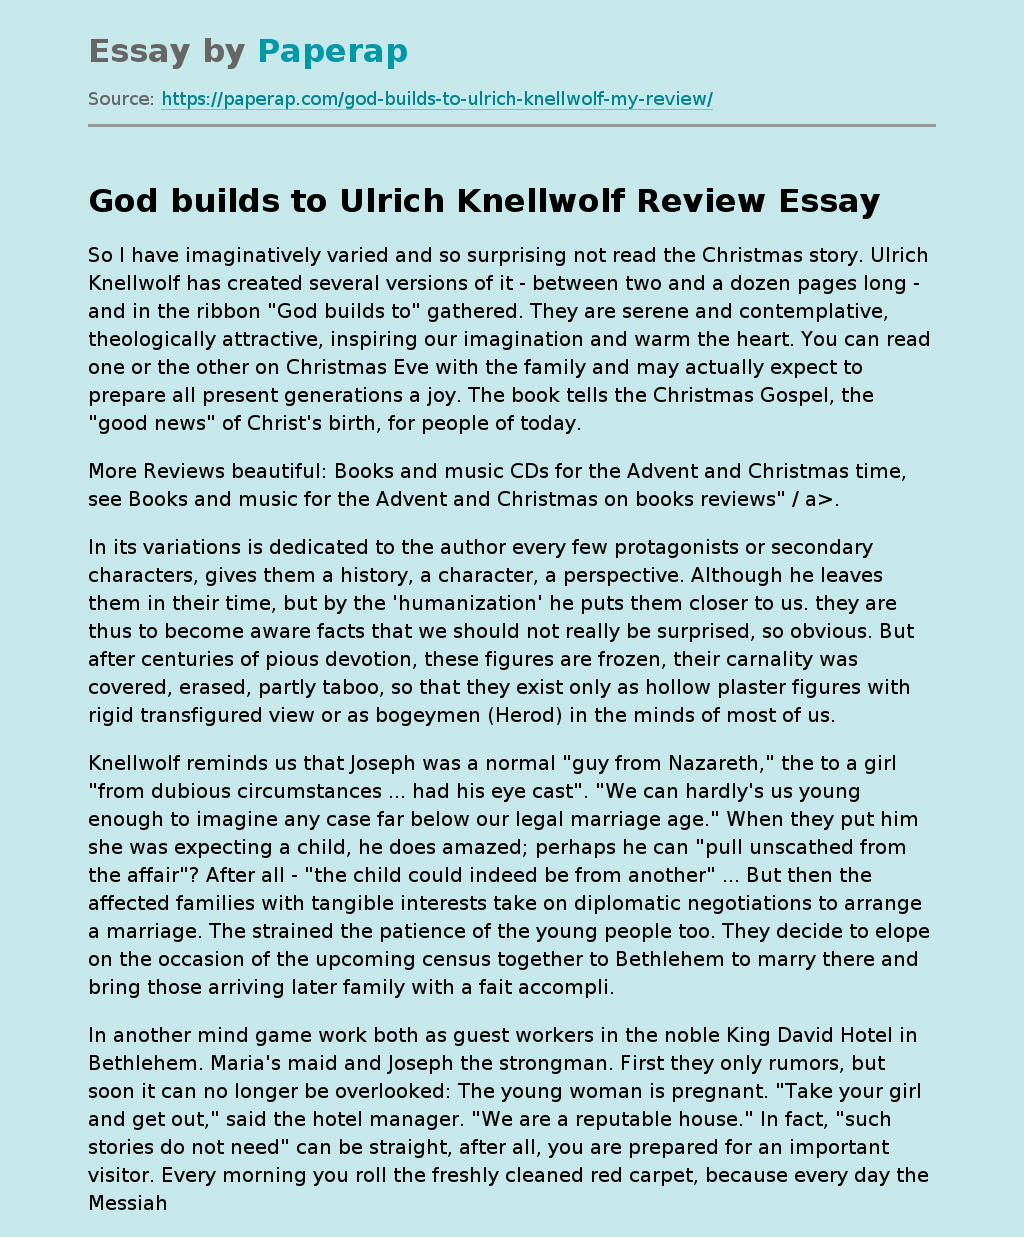 God builds to Ulrich Knellwolf Review